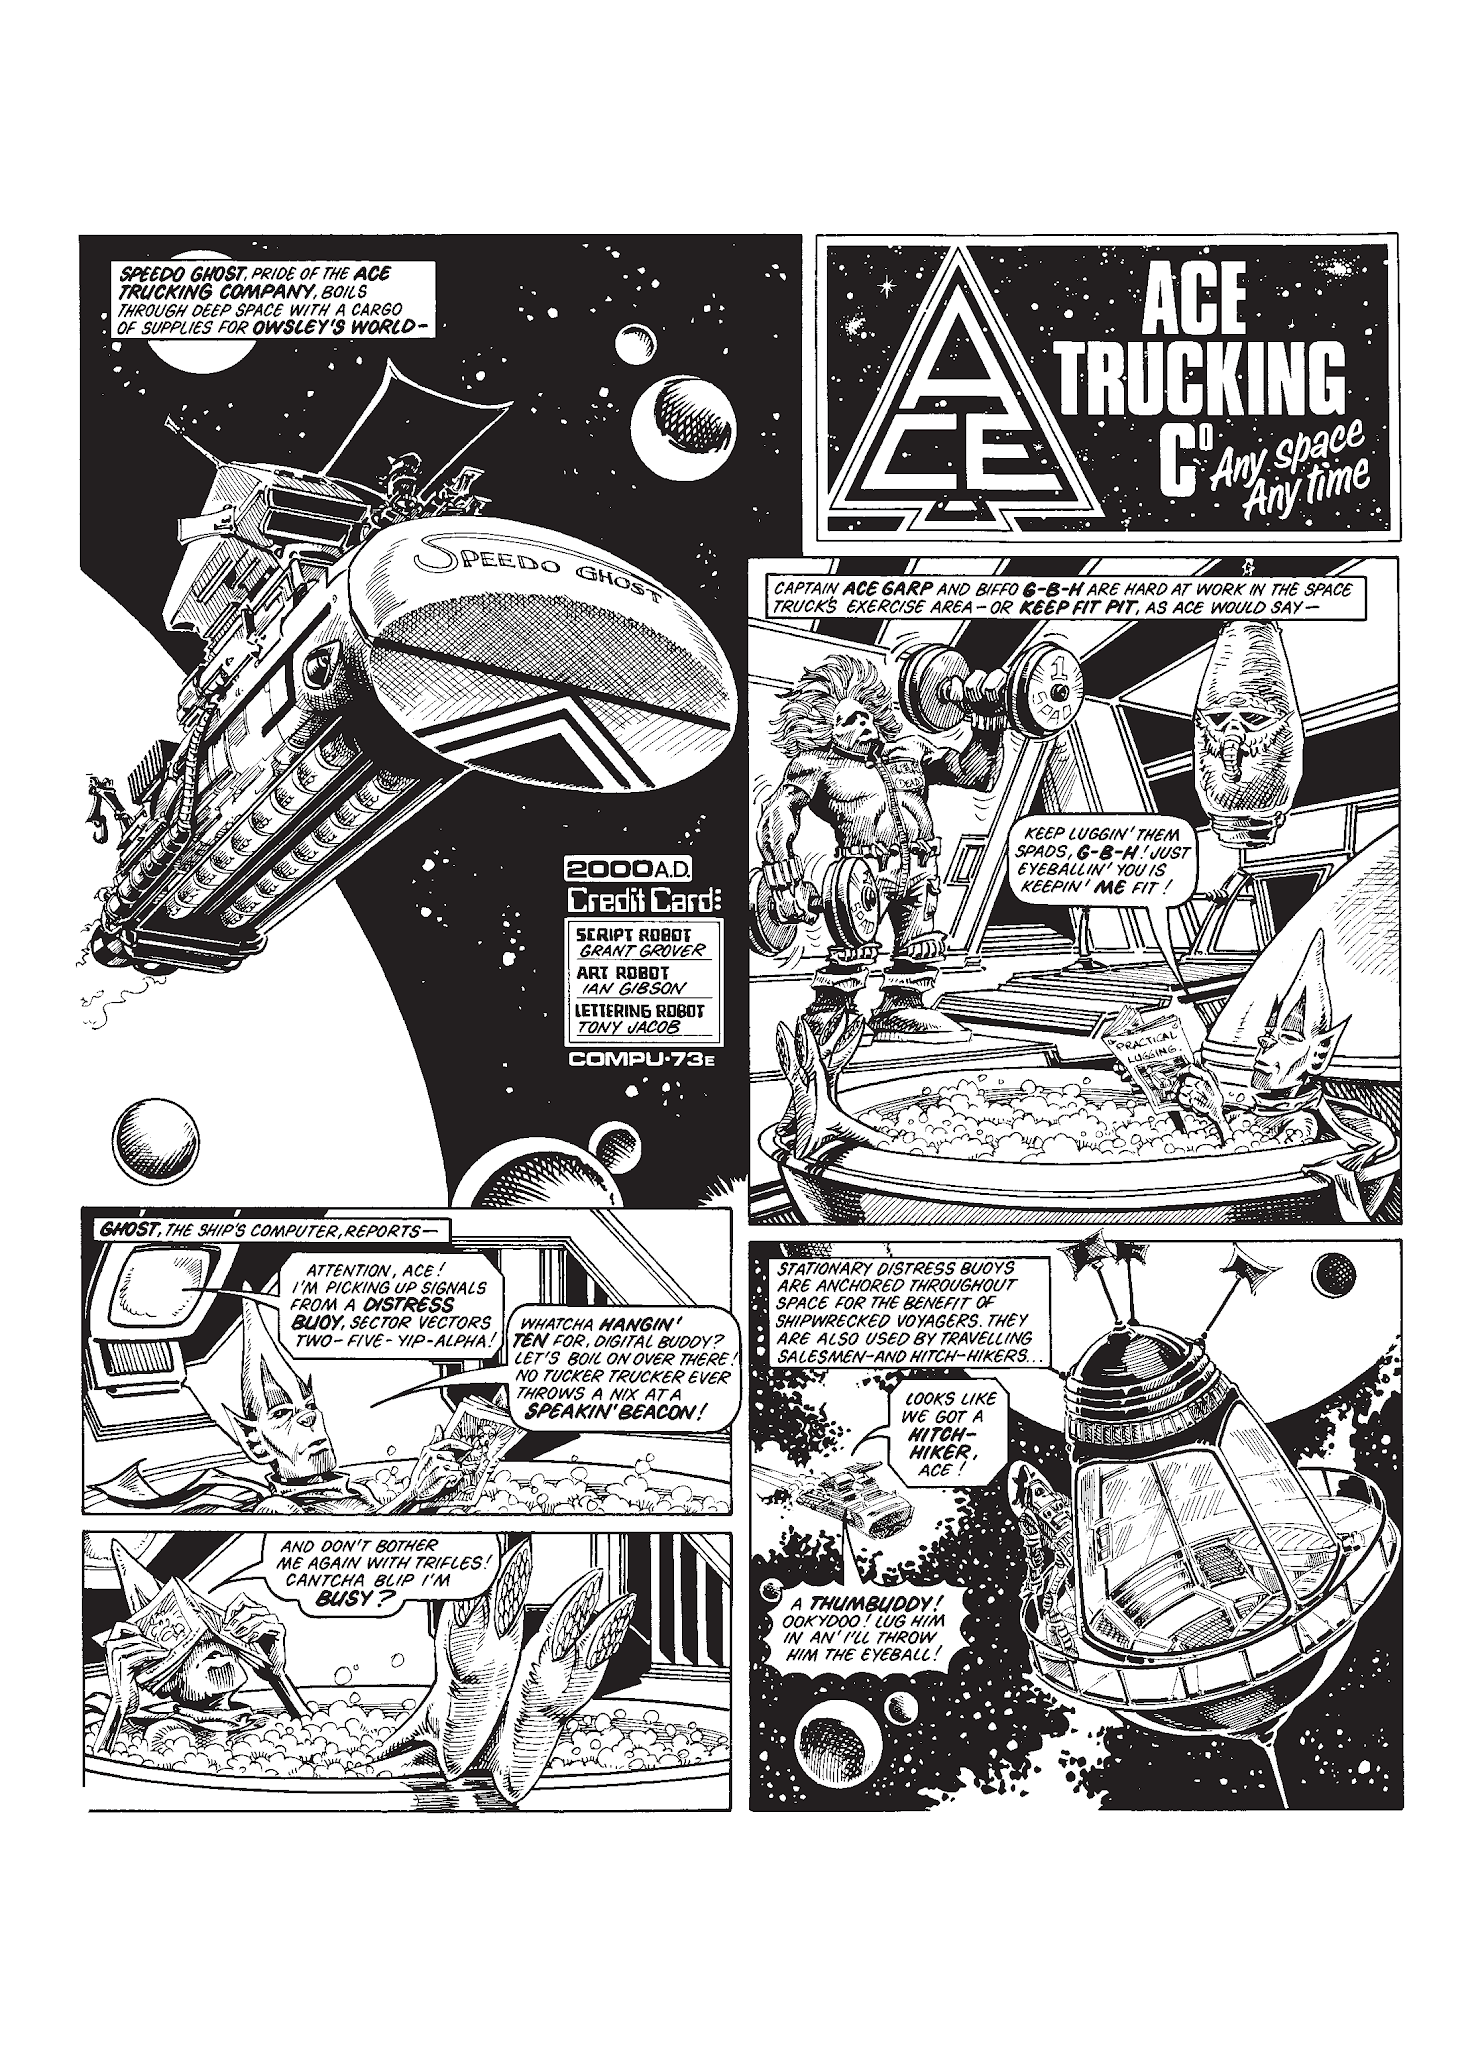 Read online The Complete Ace Trucking Co. comic -  Issue # TPB 1 - 30